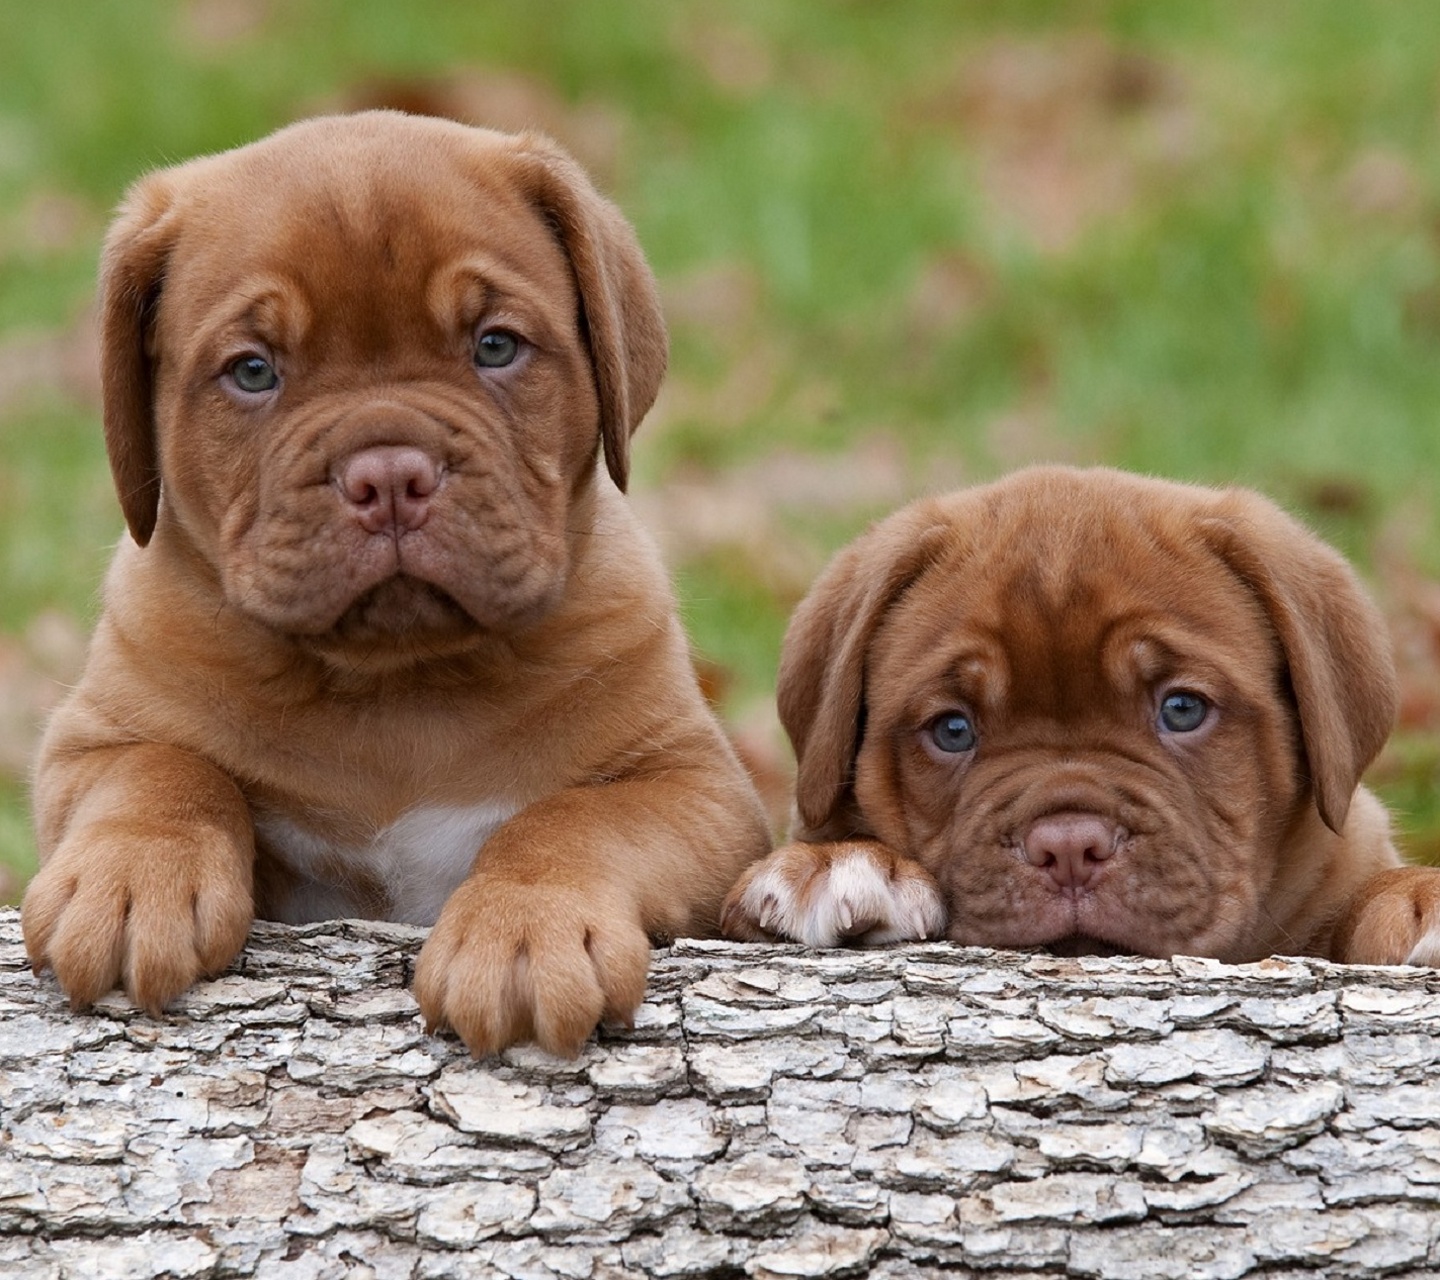 ... cute puppies cell phone wallpaper for all smart phones and tablet pc